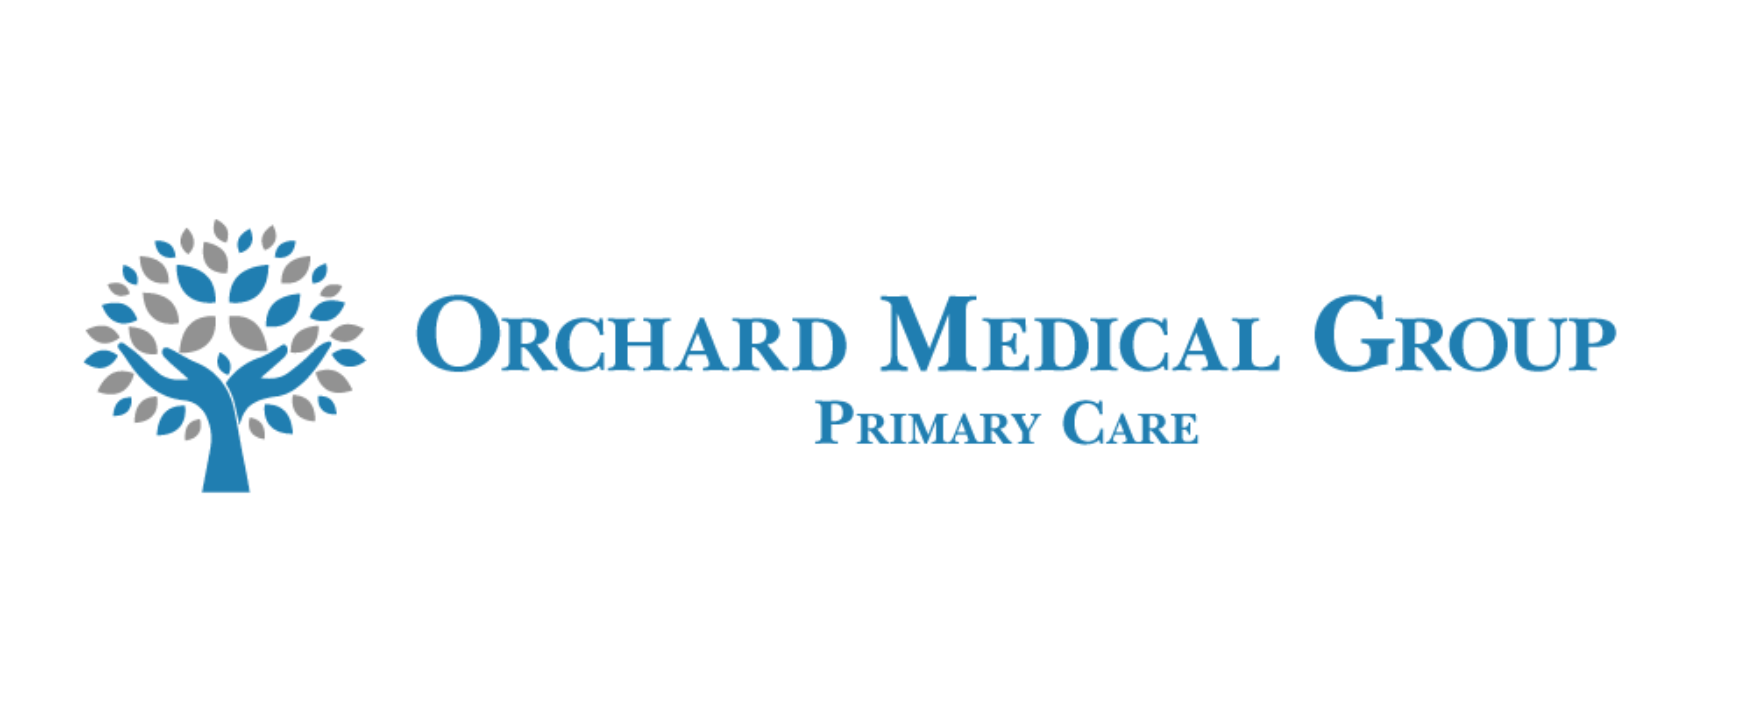 Orchard Medical Group